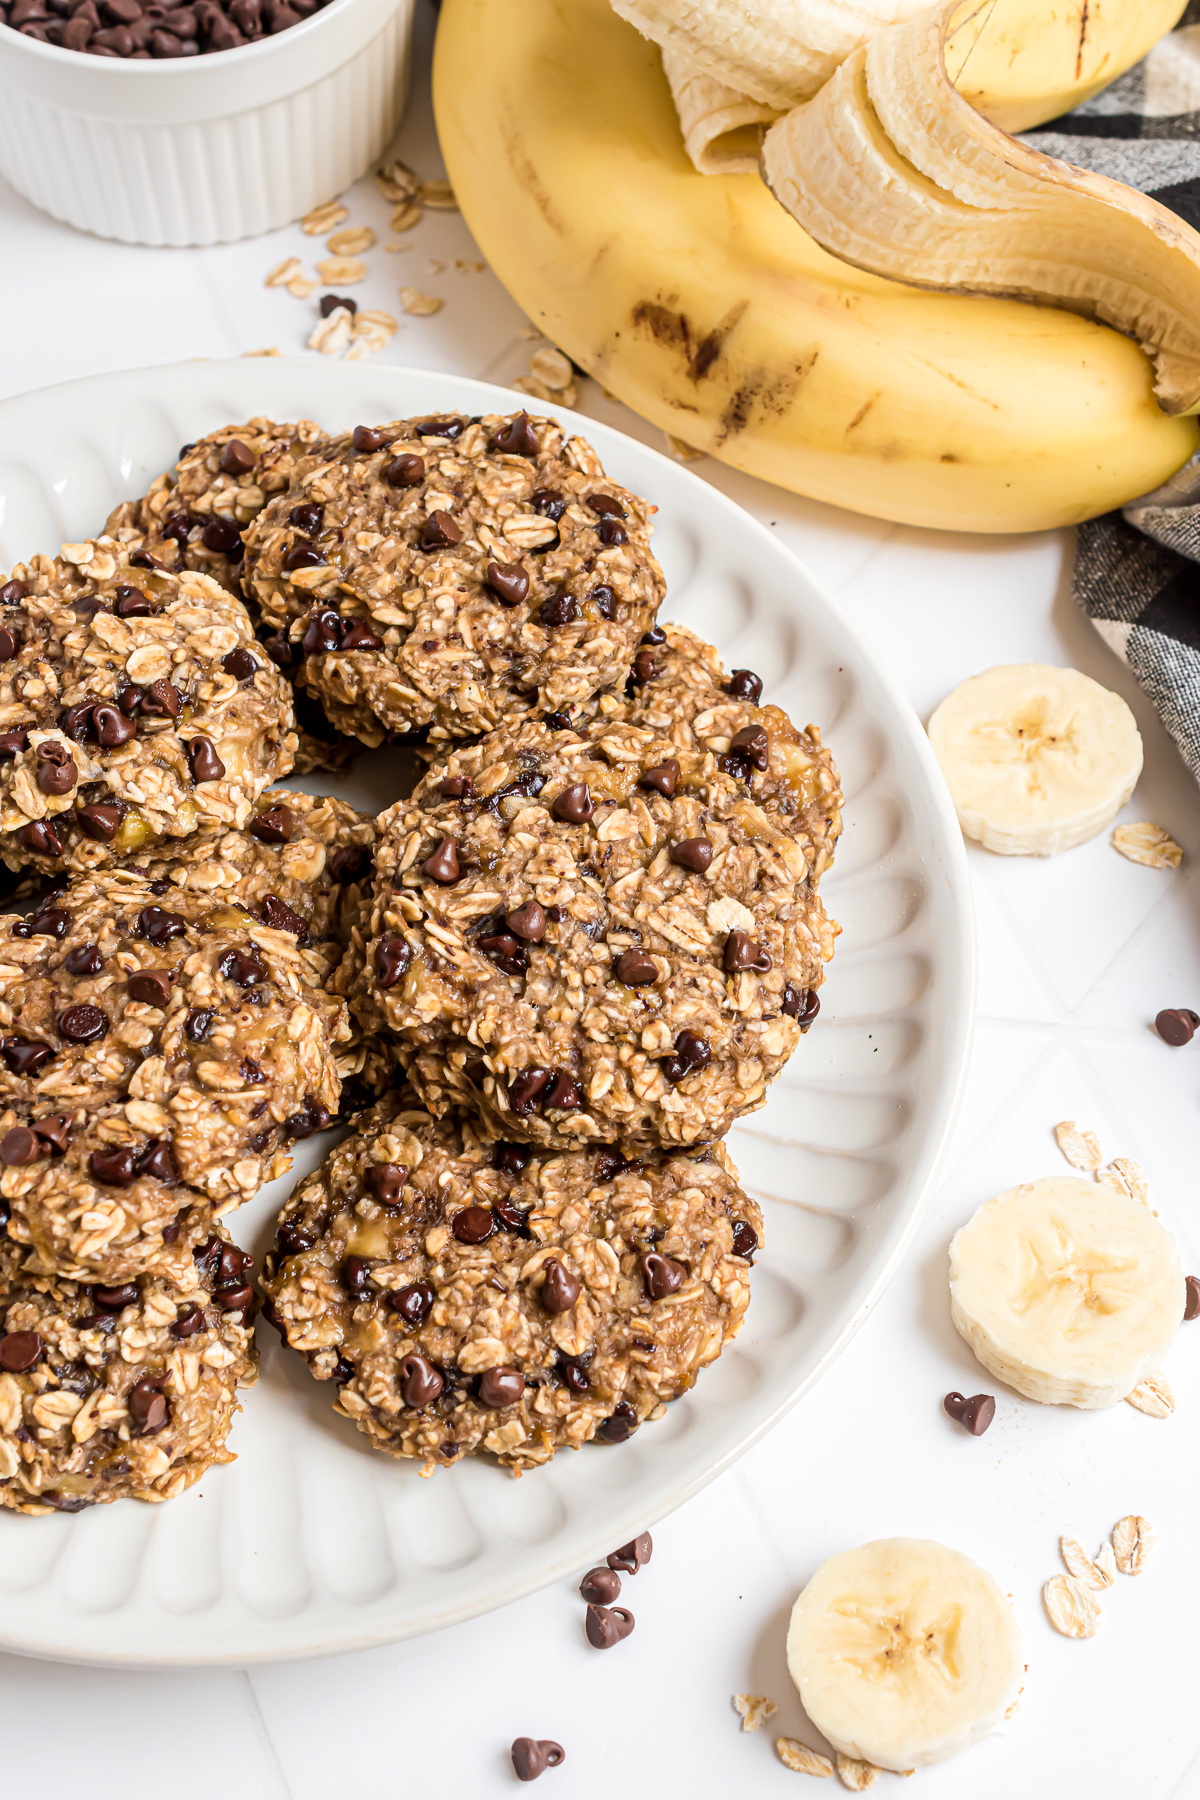 A plate of banana oatmeal cookies with sliced bananas and oats scattered around it.